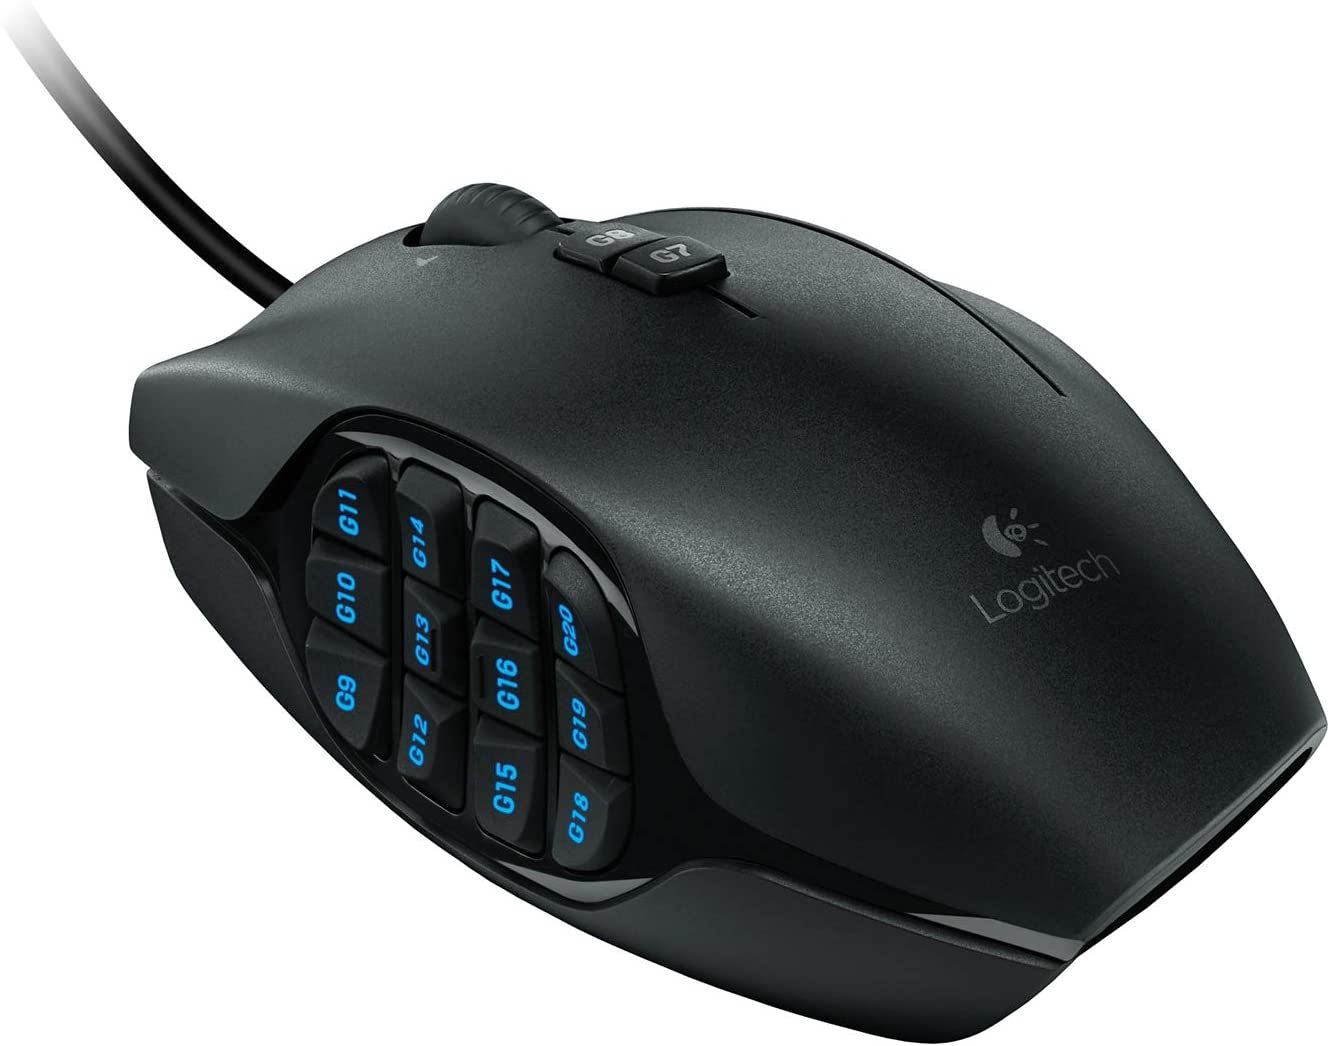 Logitech-G600-MMO-Gaming-Mouse-1-2